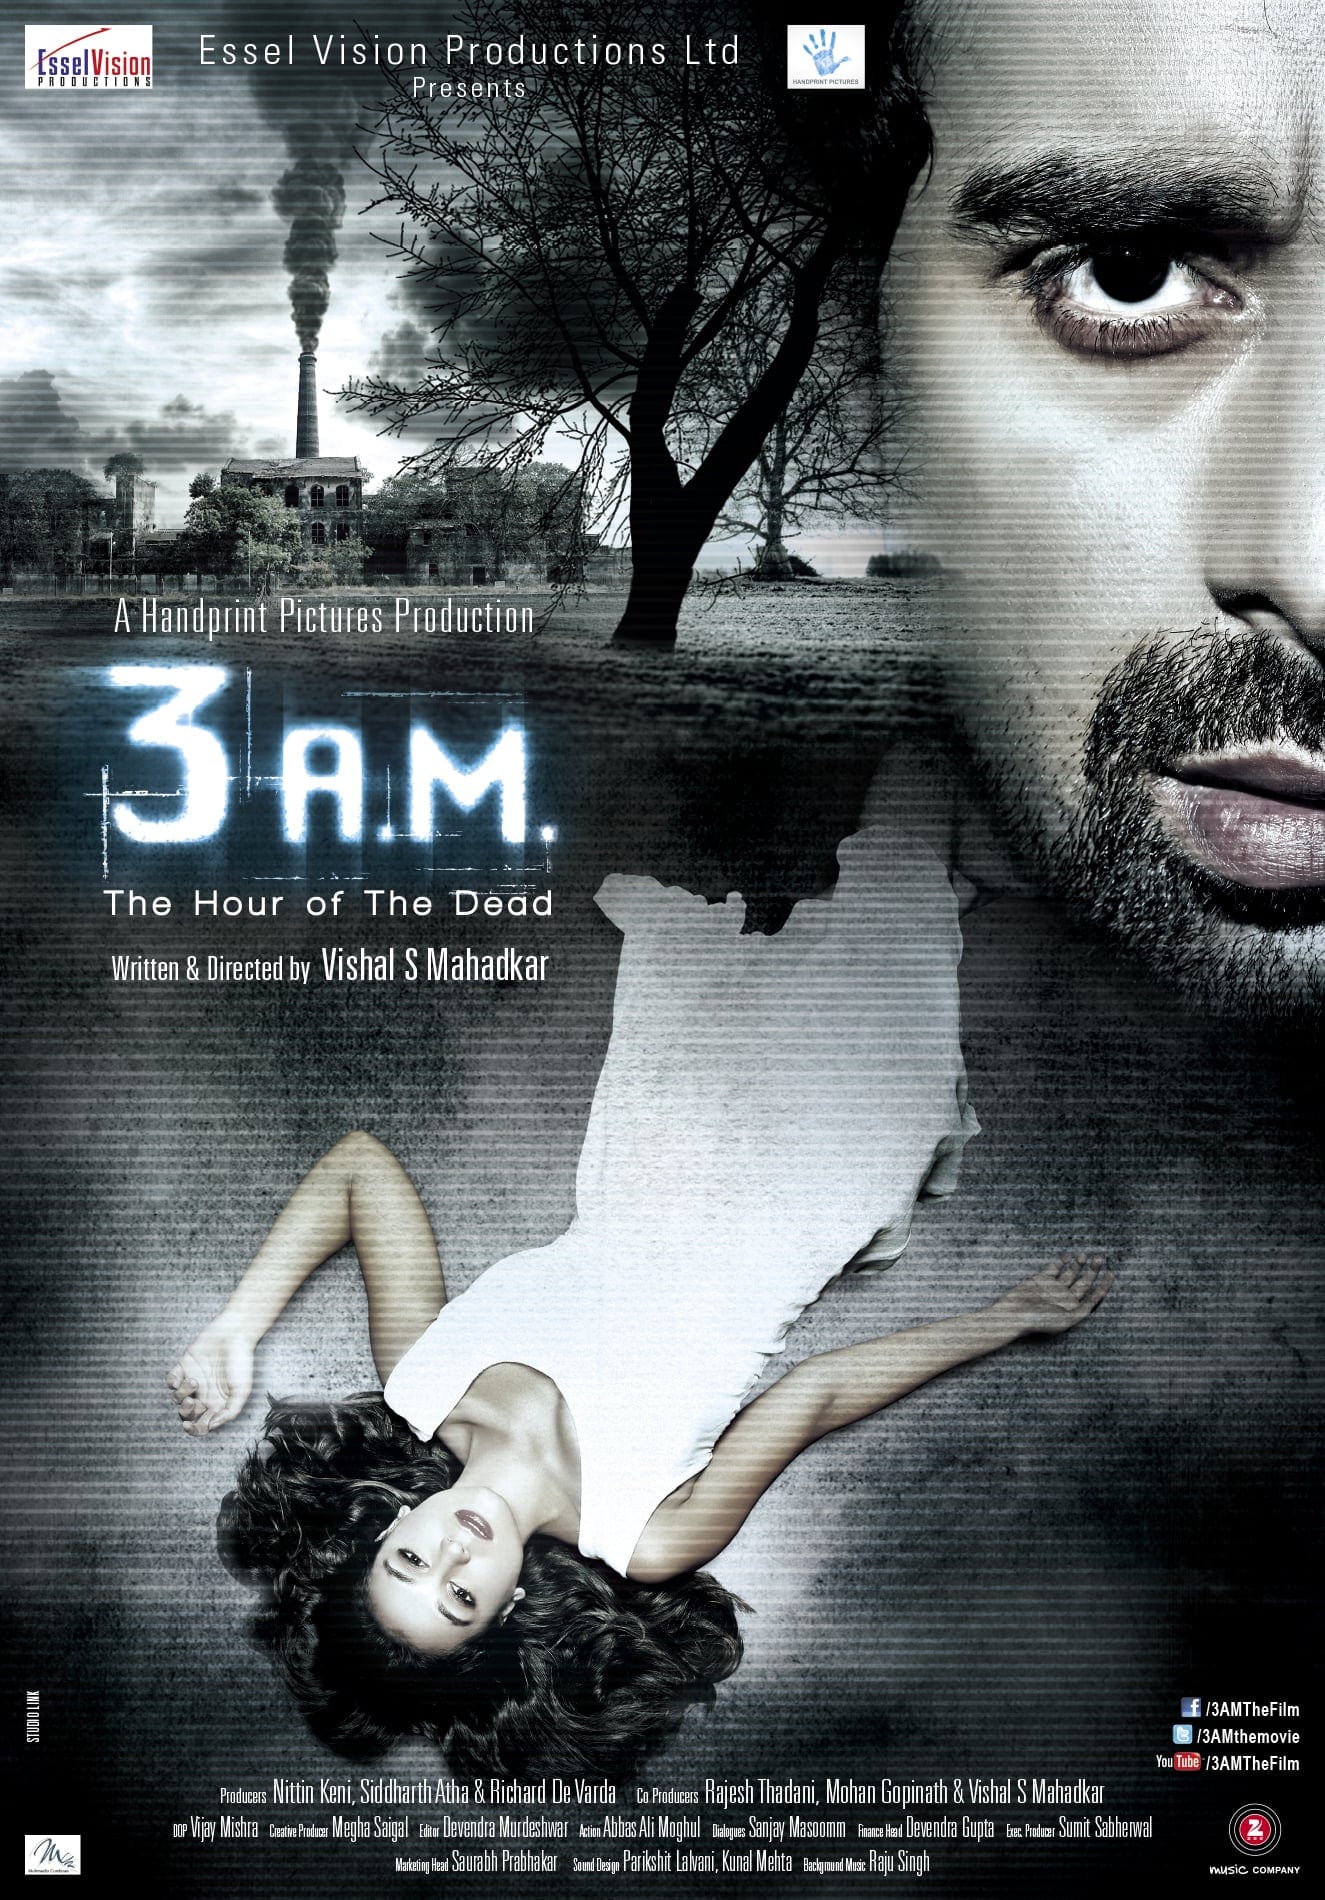 Poster for the movie "3 A.M"